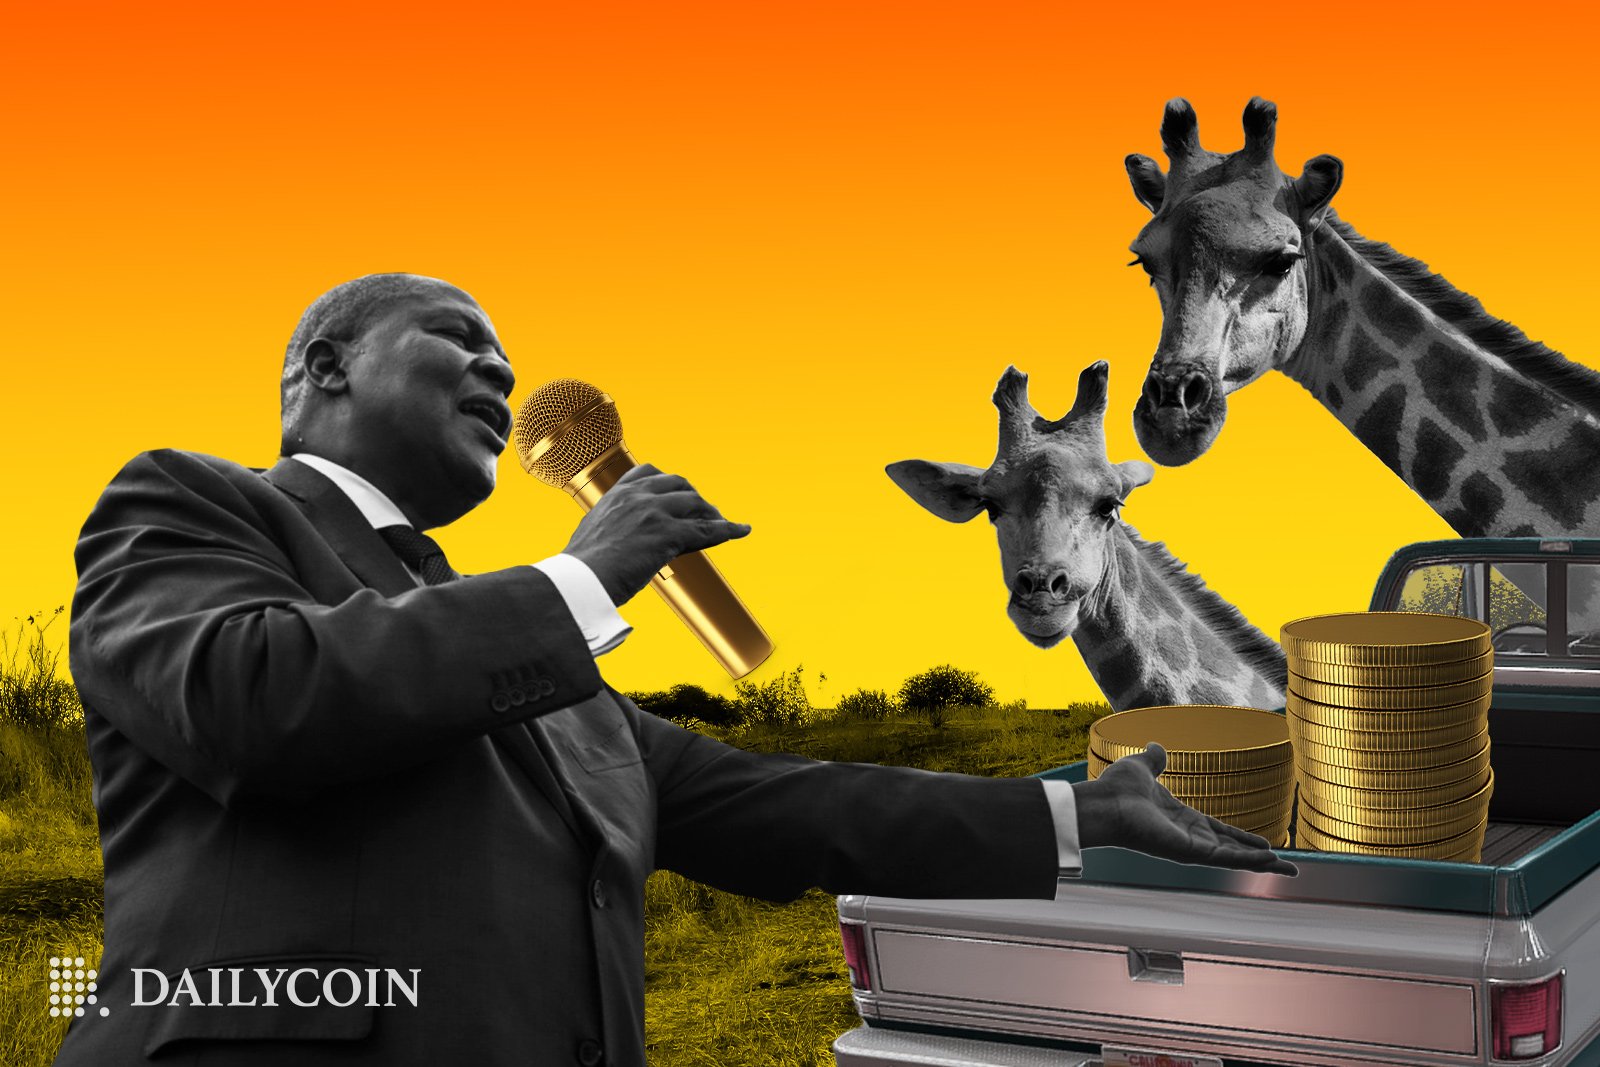 President of Central African Republic holding a golden microphone, giving a speech to the curious giraffes.